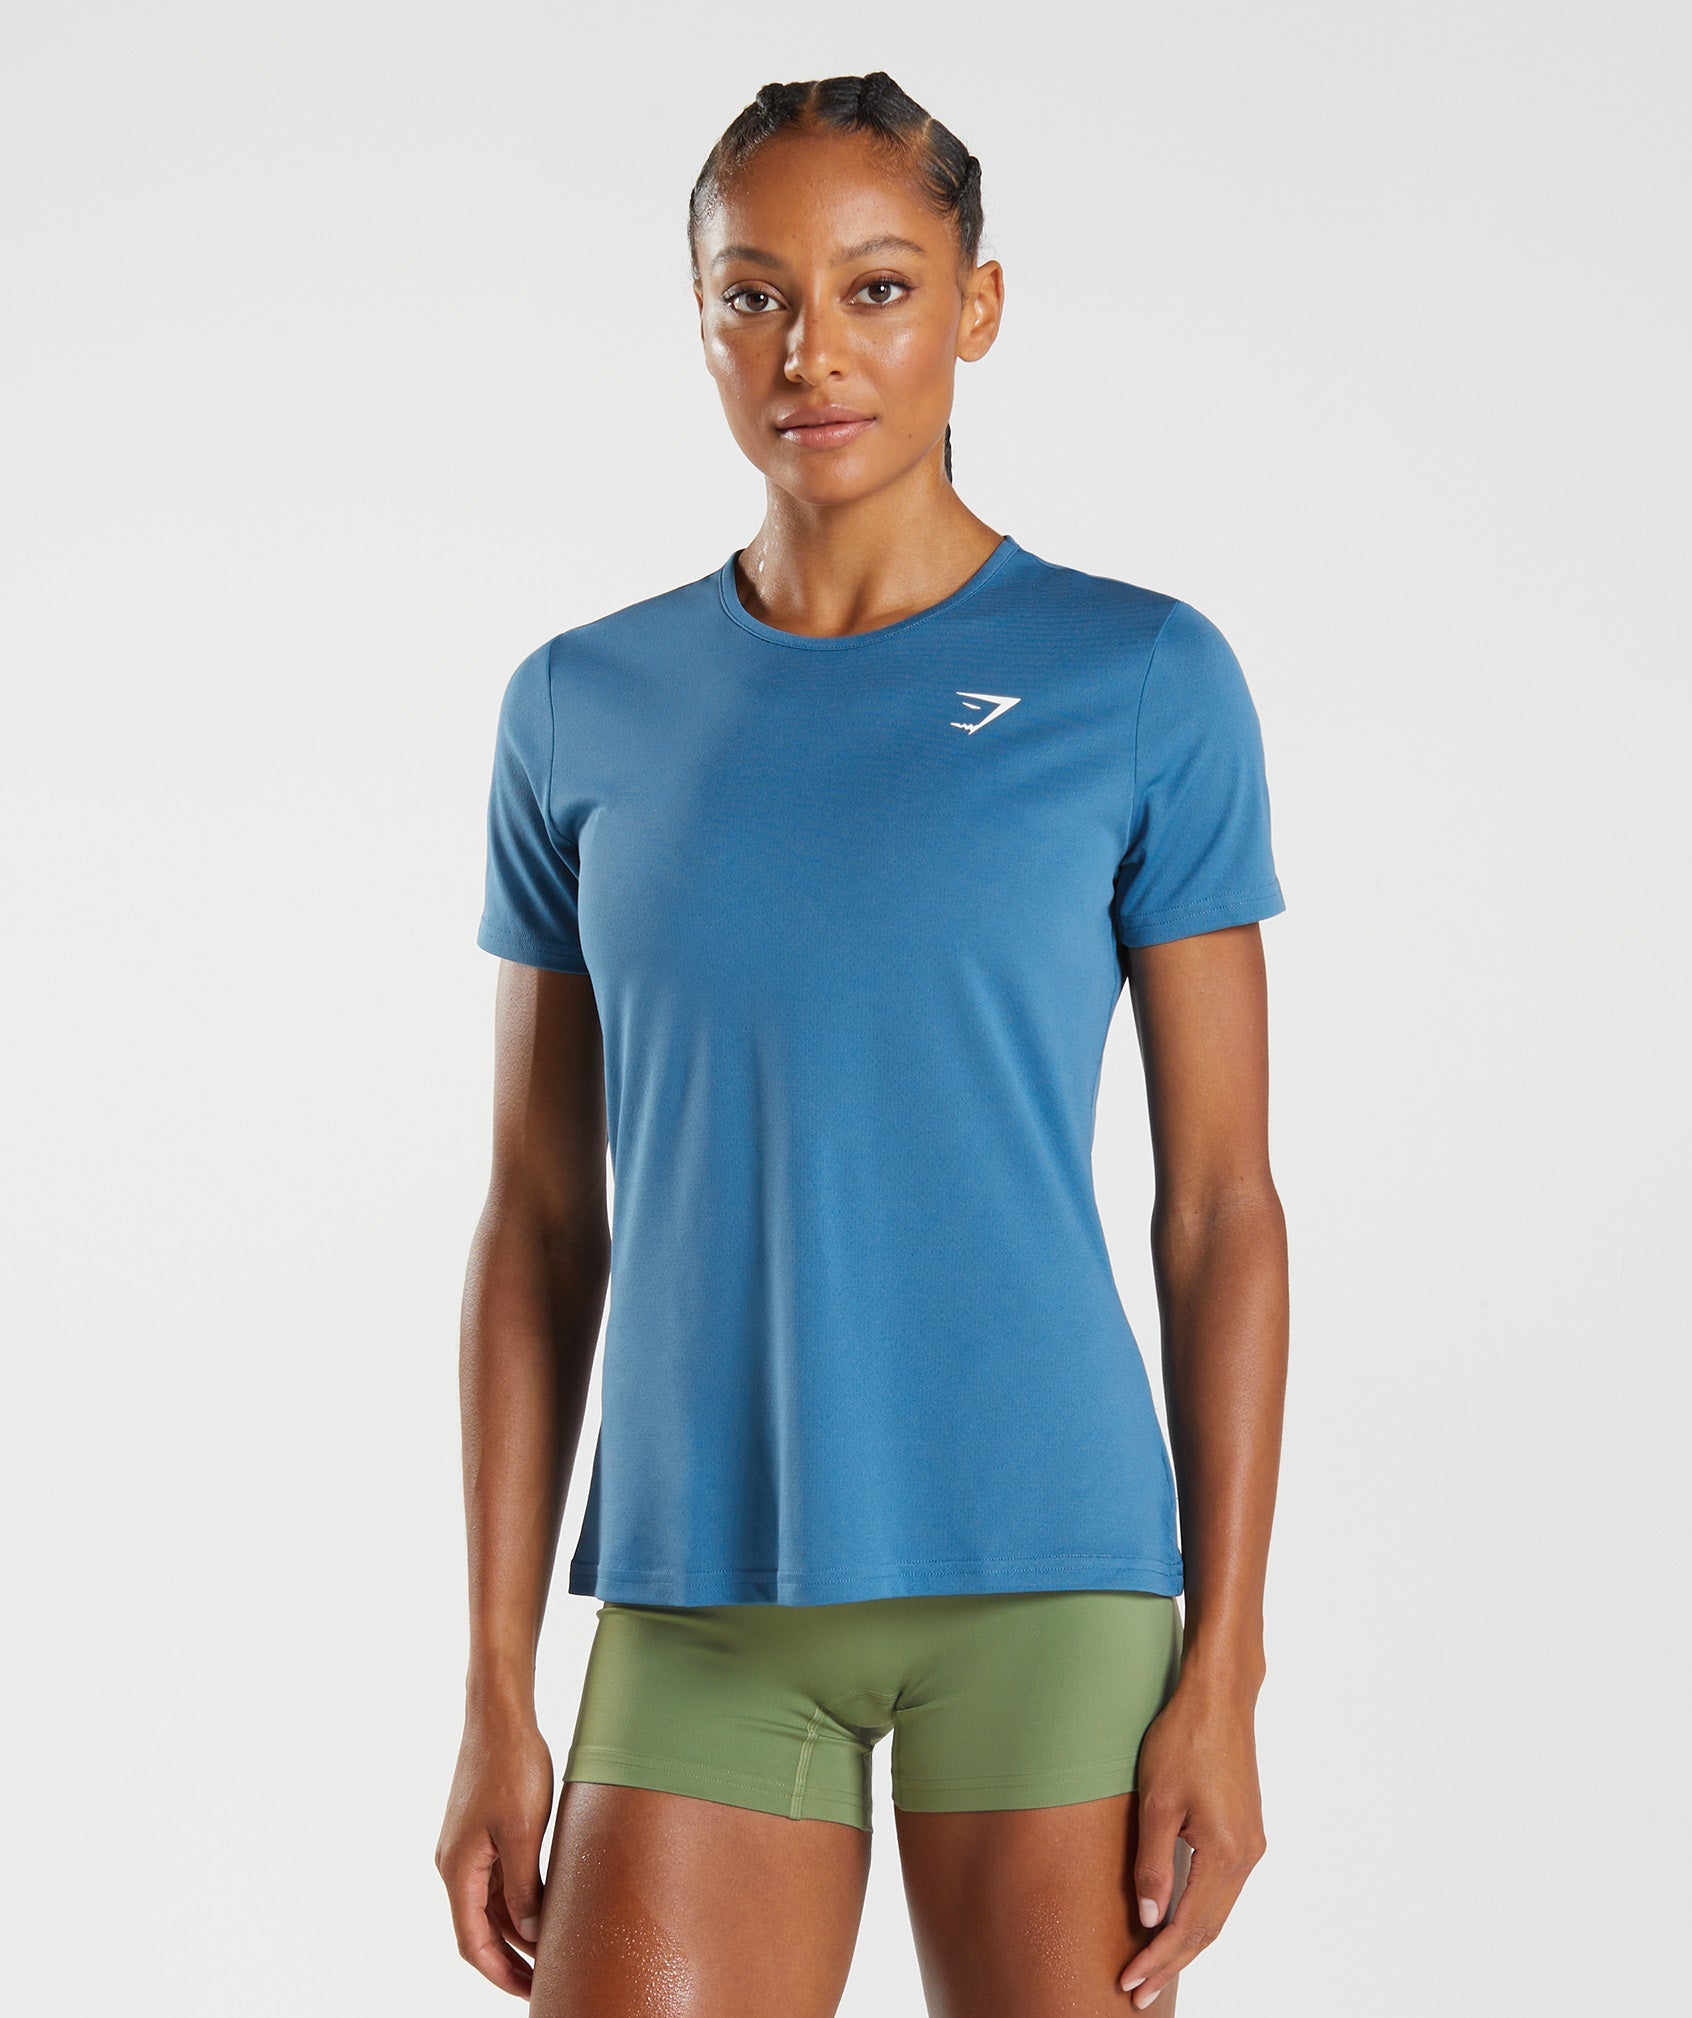 Training T-Shirt in Lakeside Blue - view 1